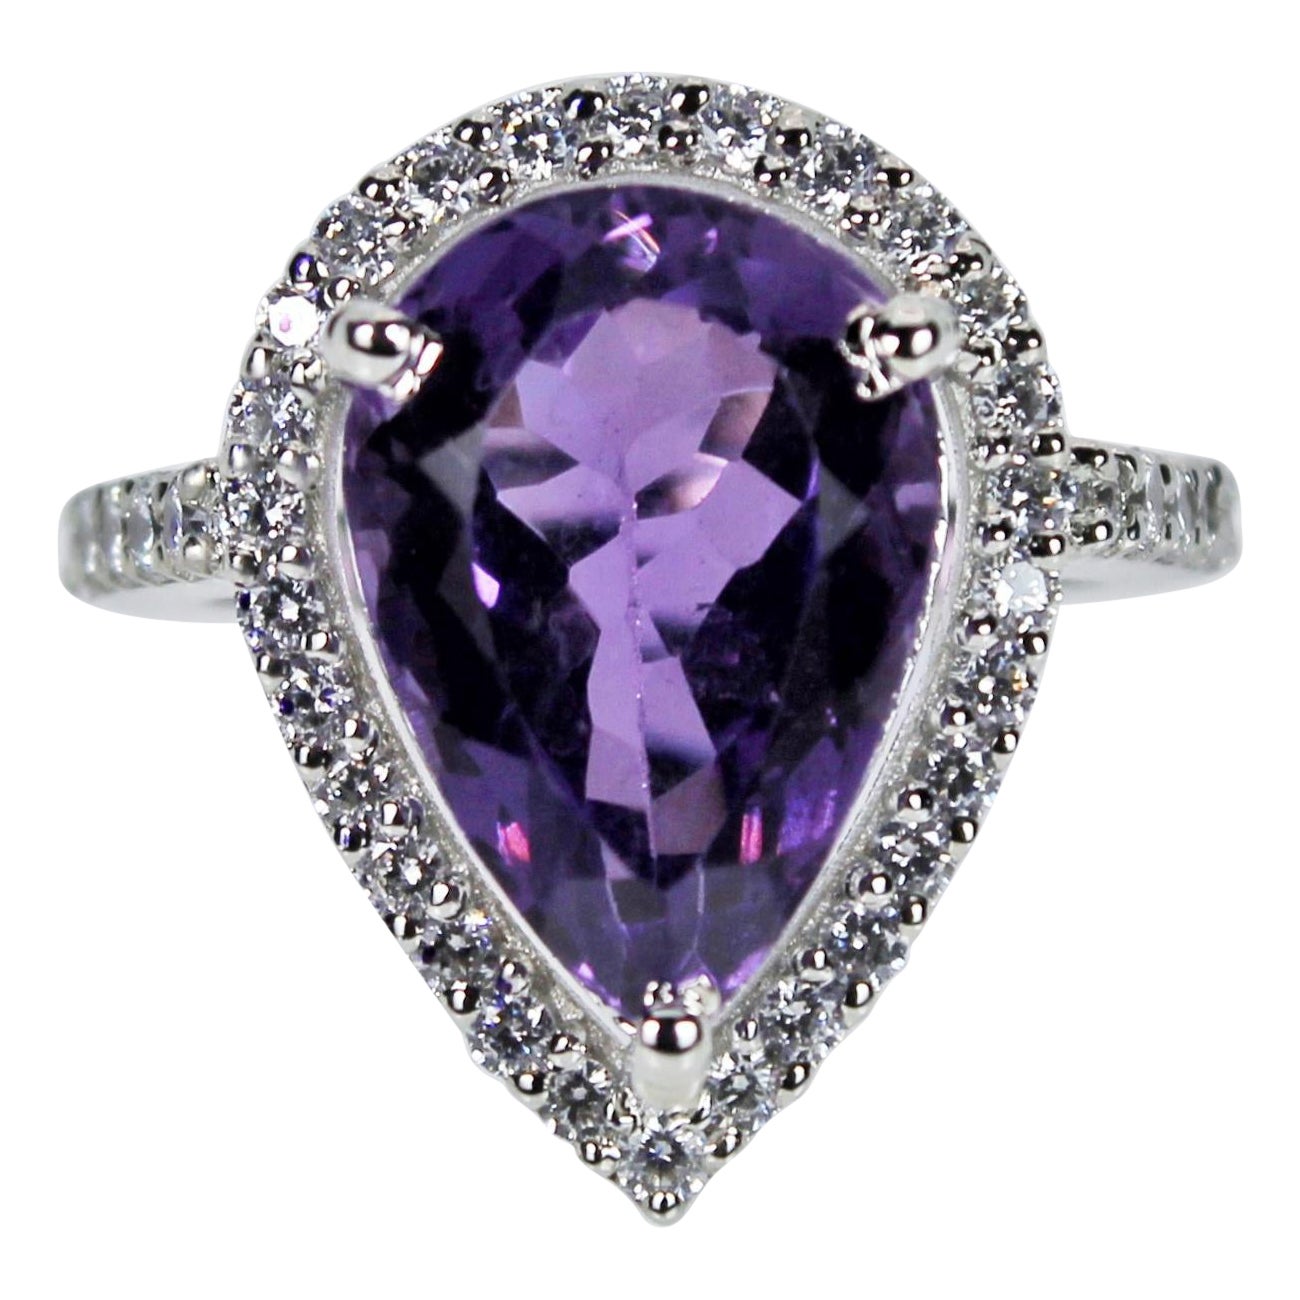 Pear Shaped Natural Amethyst Gemstone Ring For Sale